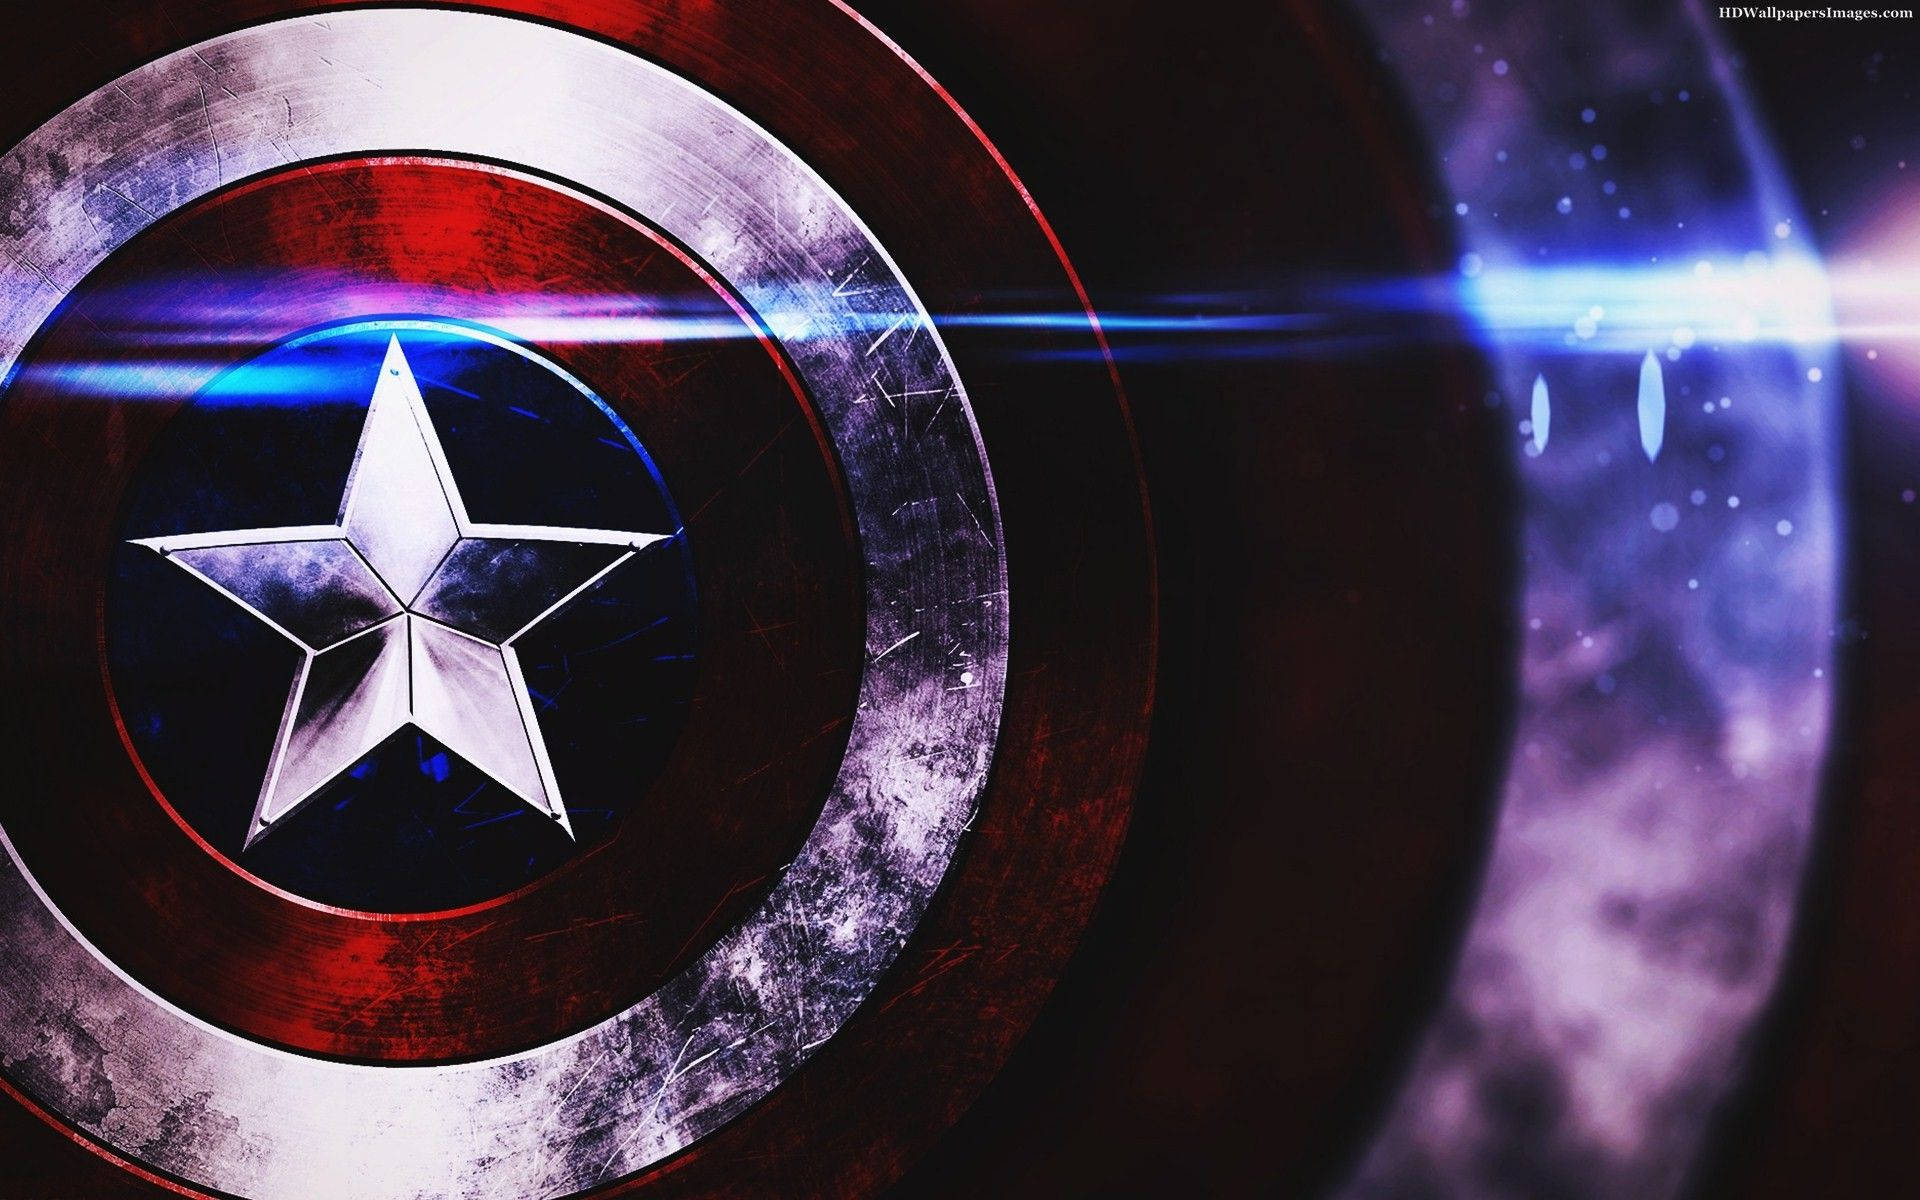 Captain America 1920X1200 Wallpaper and Background Image